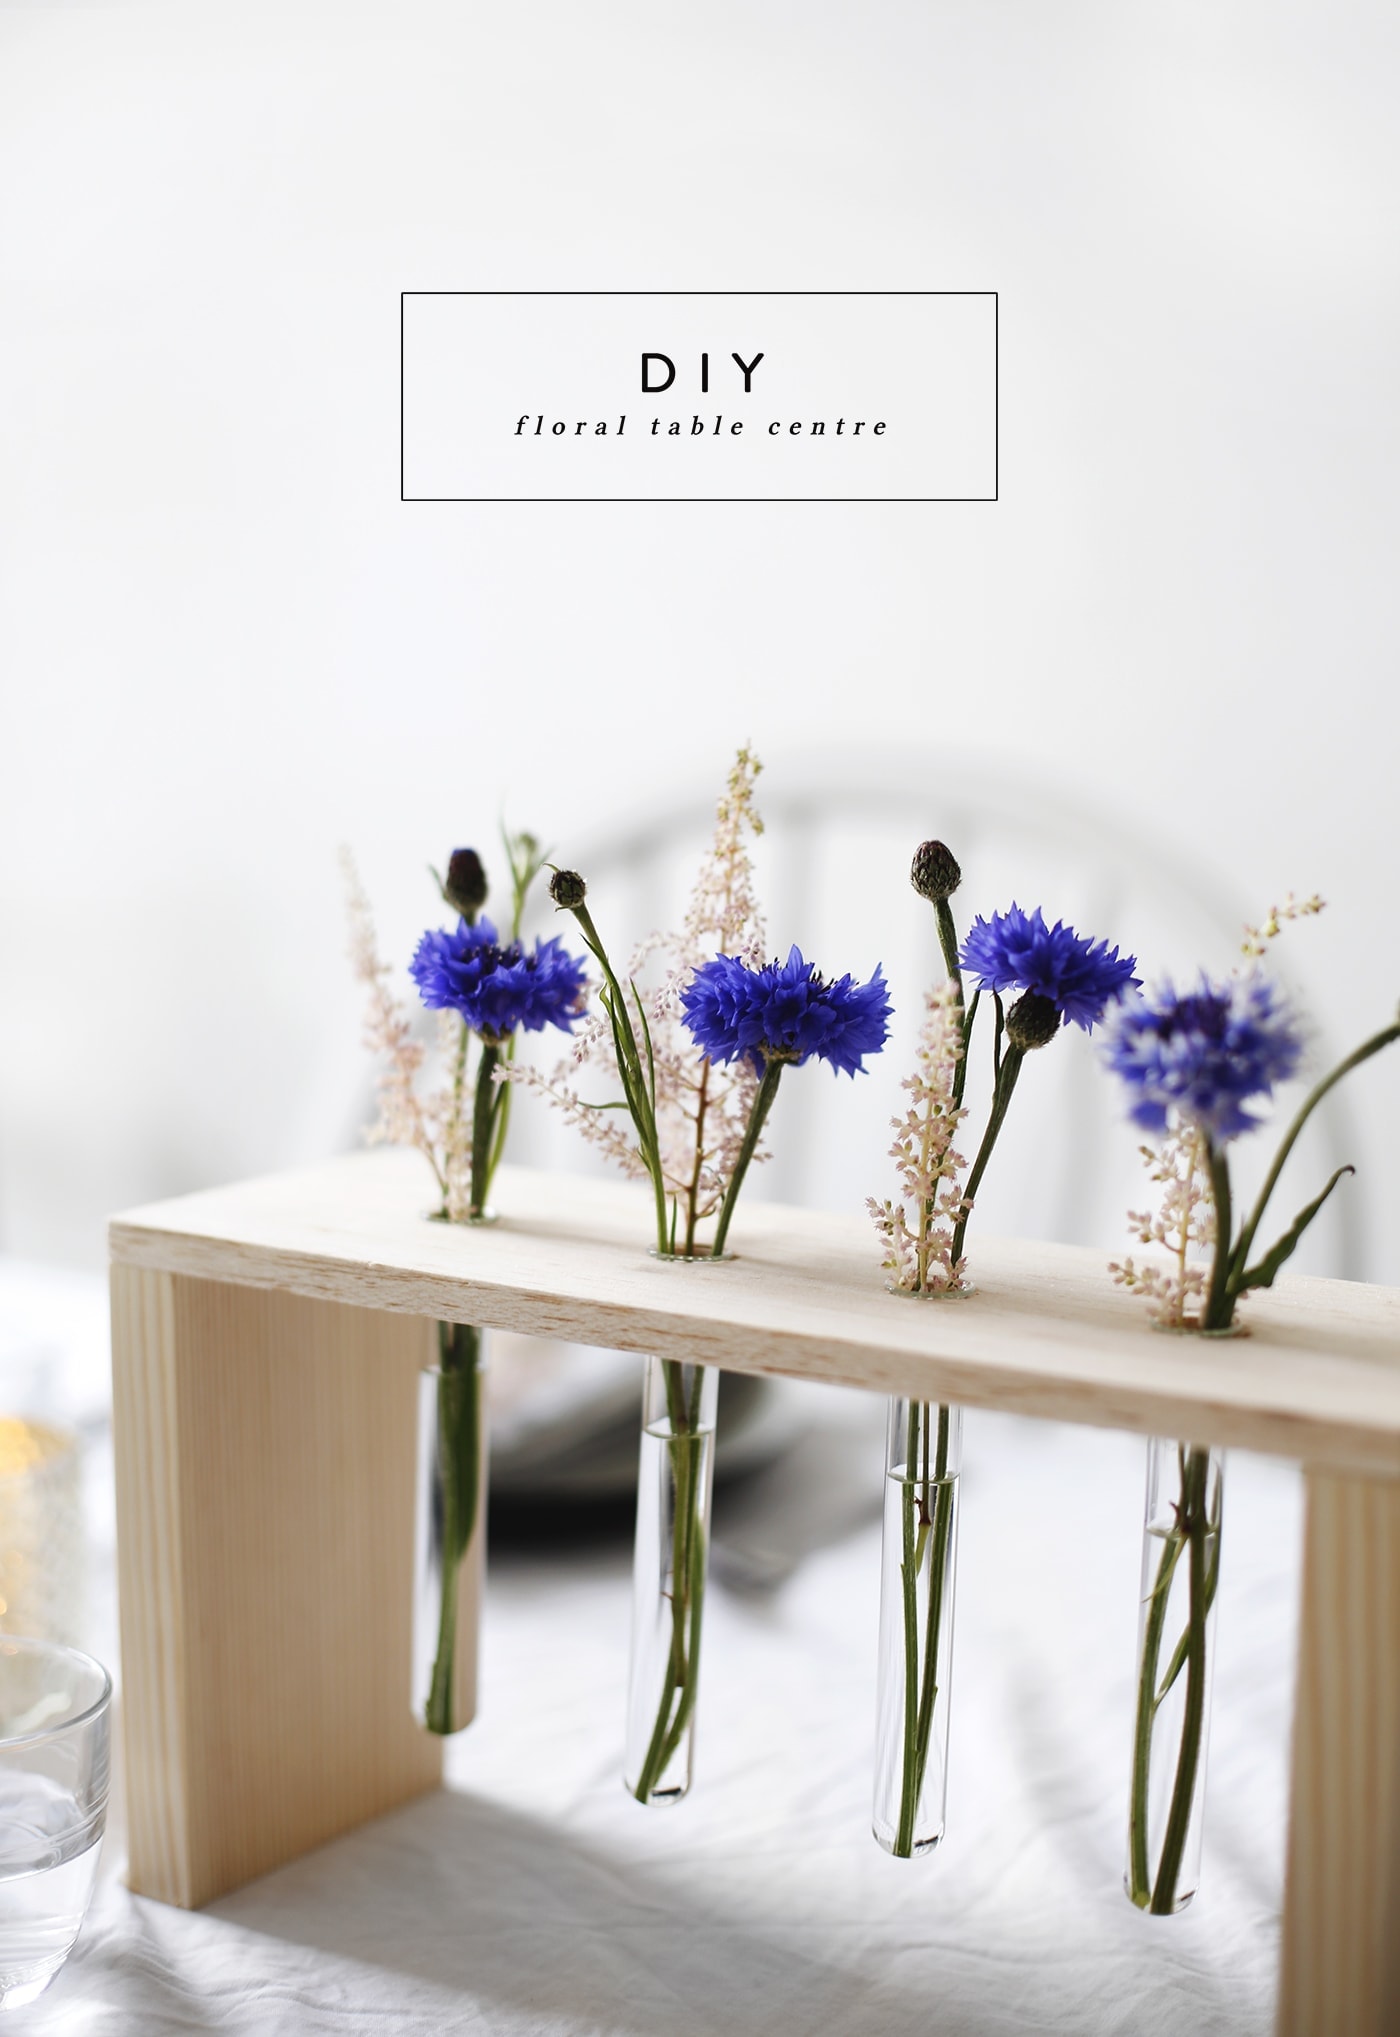 DIY floral table centre | home diy tutorials | a fun way to display flowers